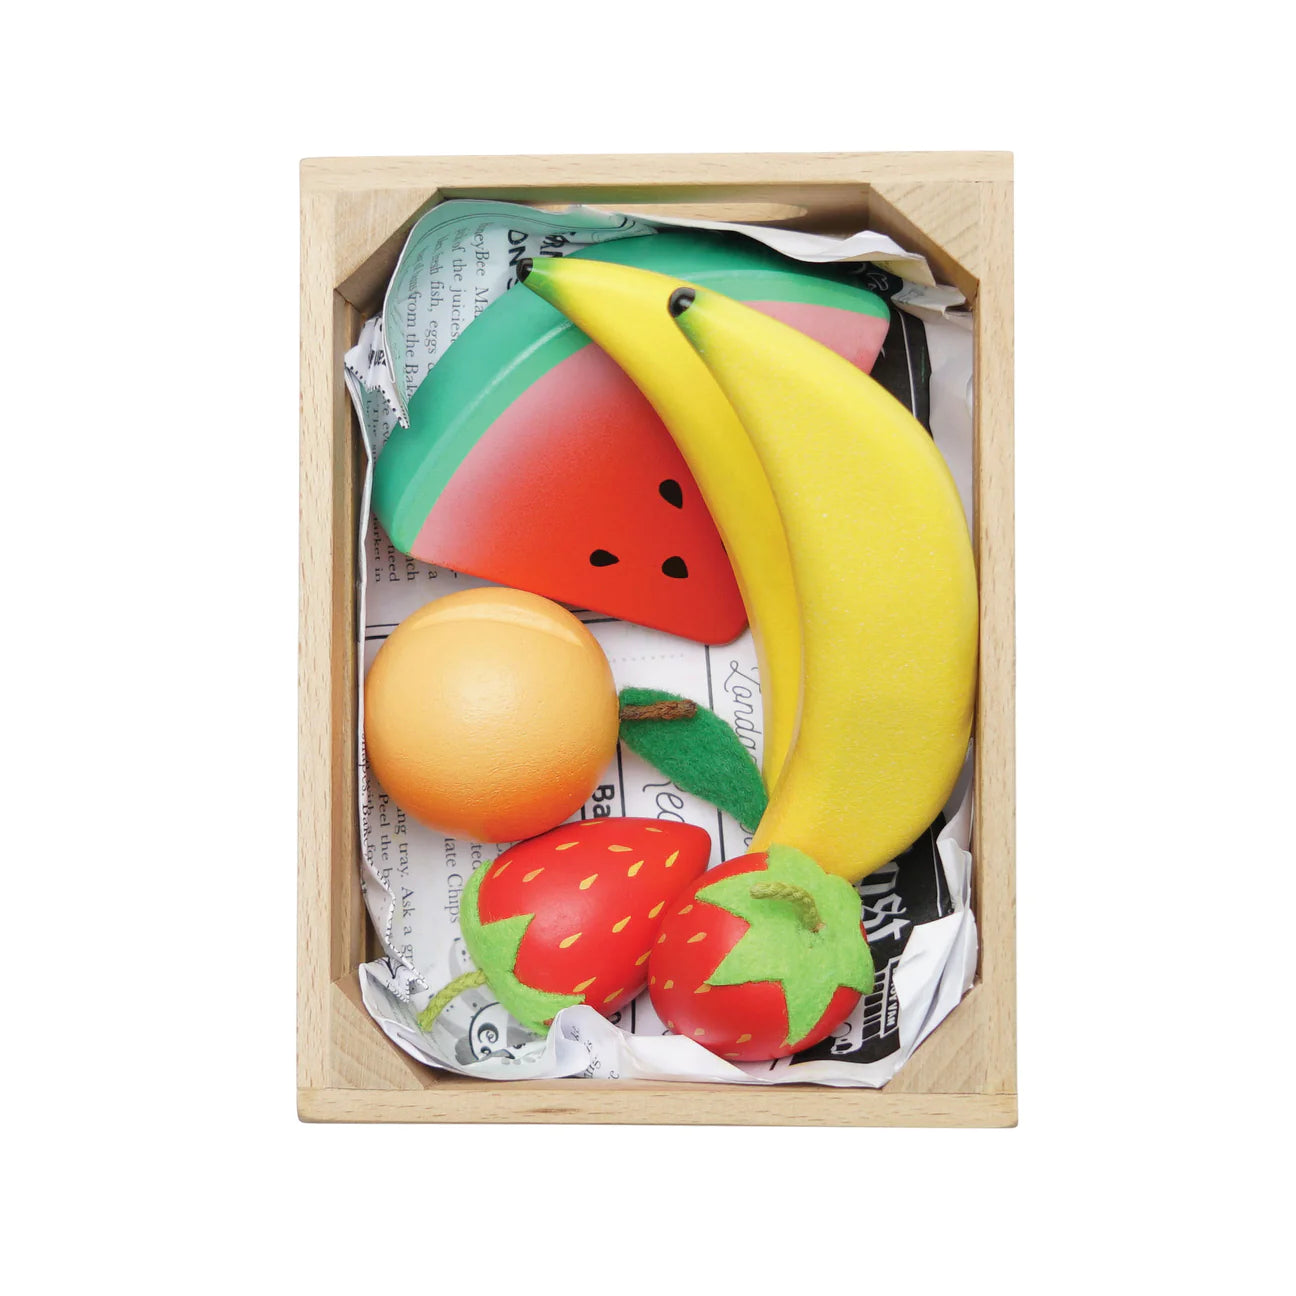 Le Toy Van - Fruits '5 a Day' Crate